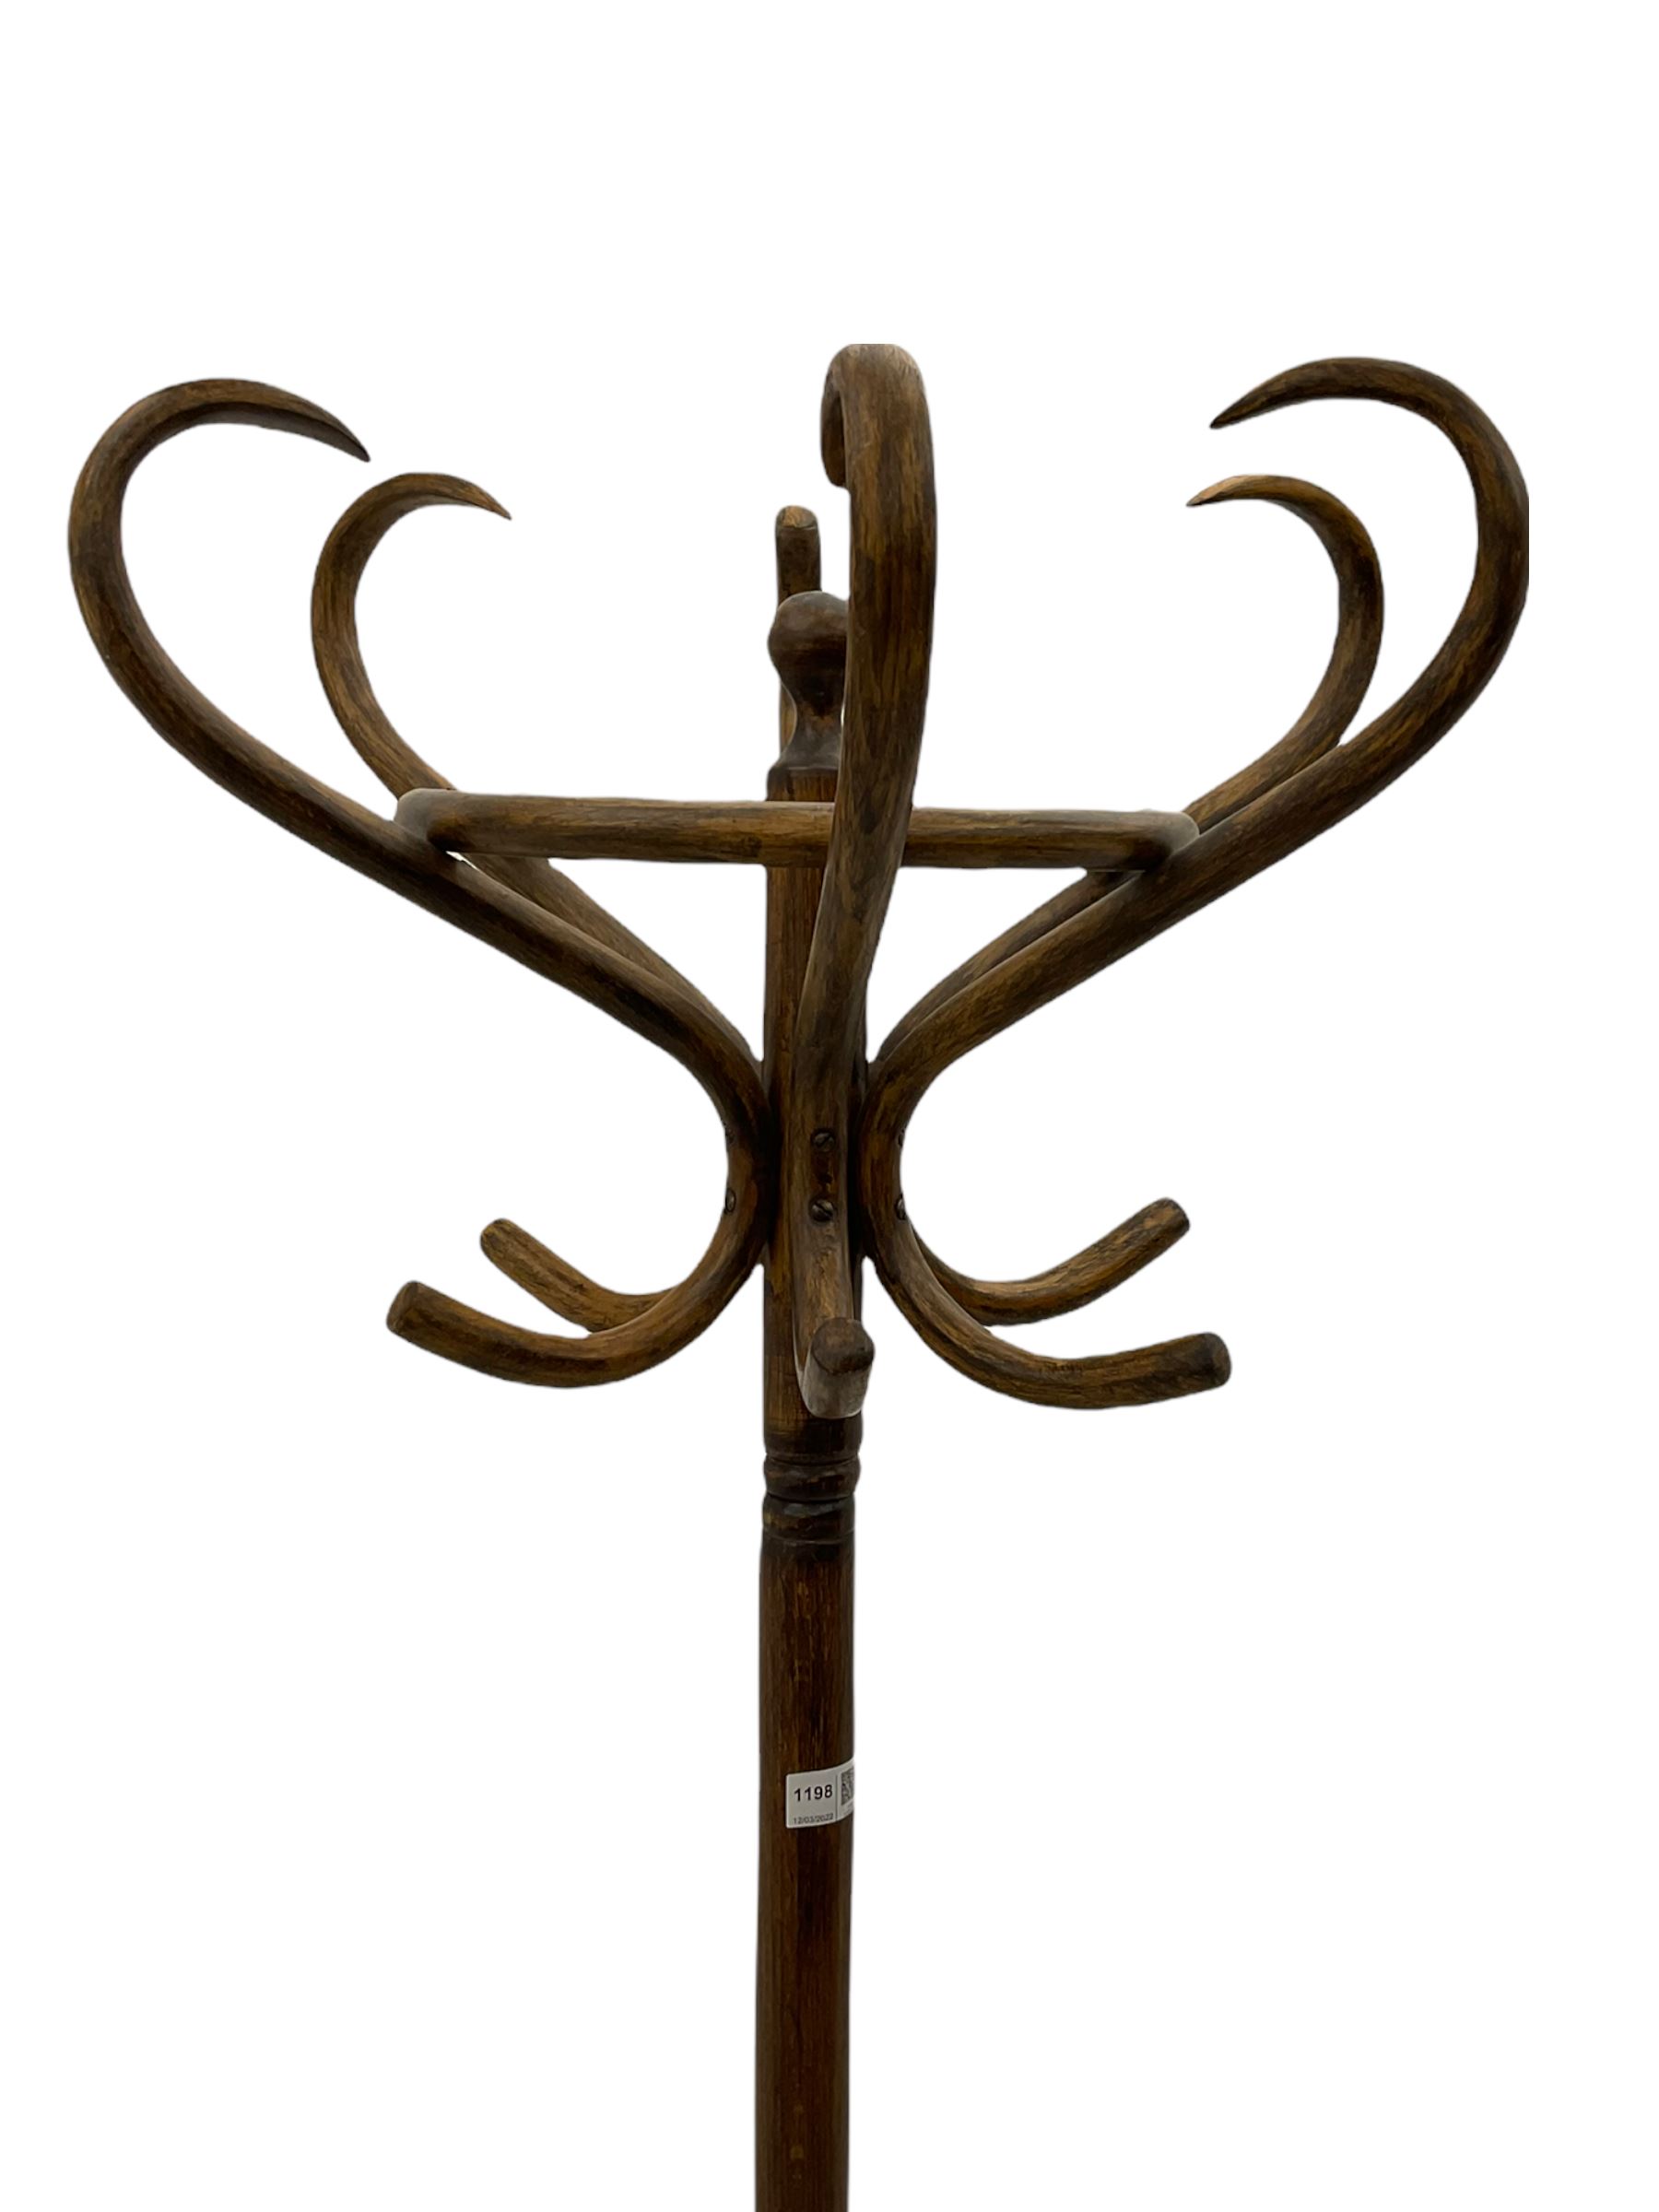 20th century bentwood hat and coat stand - Image 2 of 6